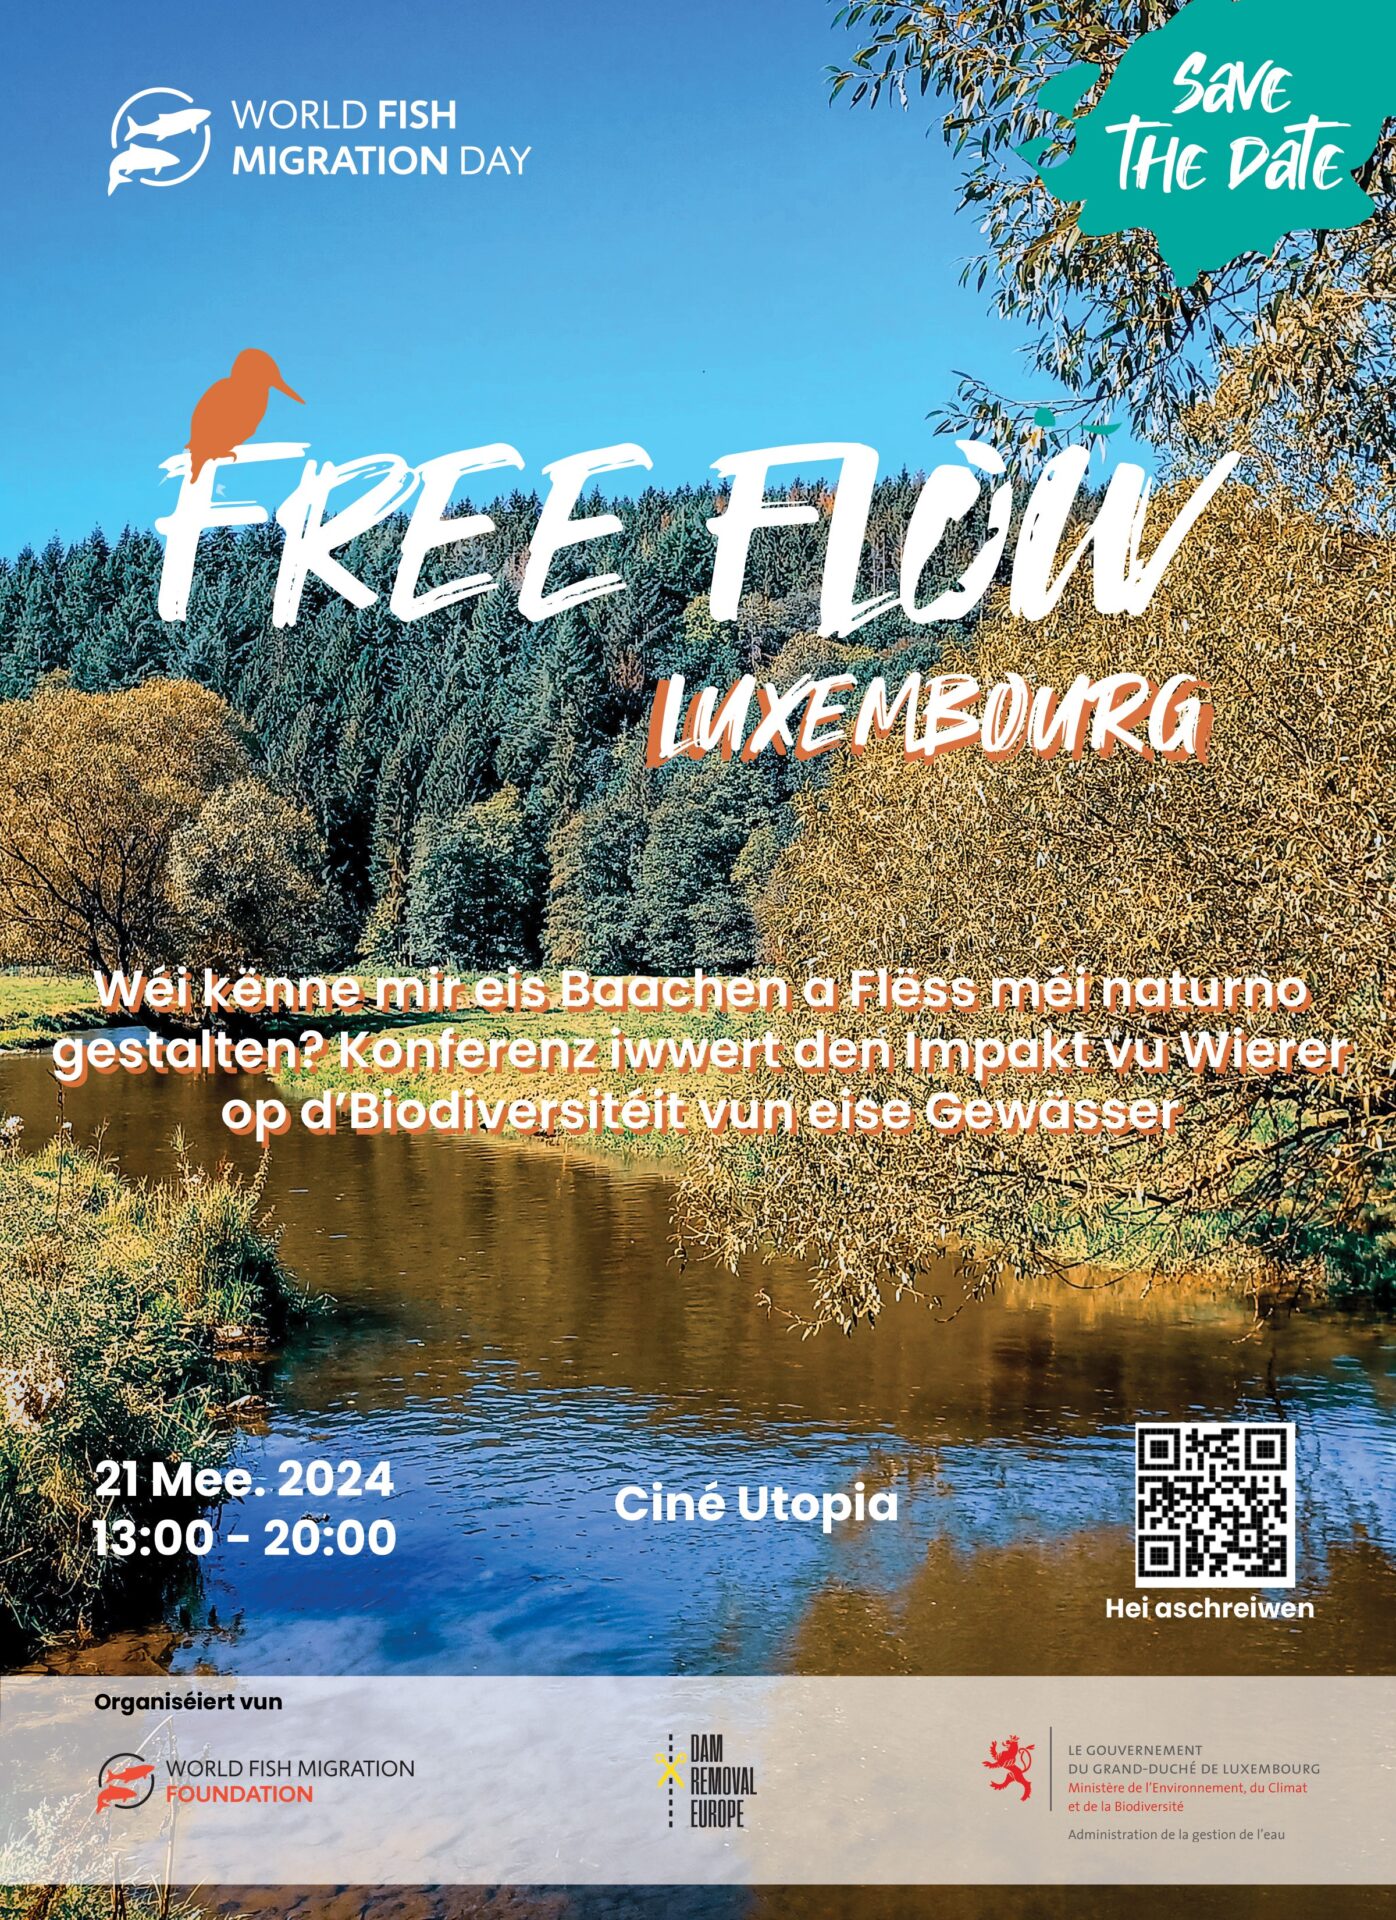 Free Flow Luxembourg